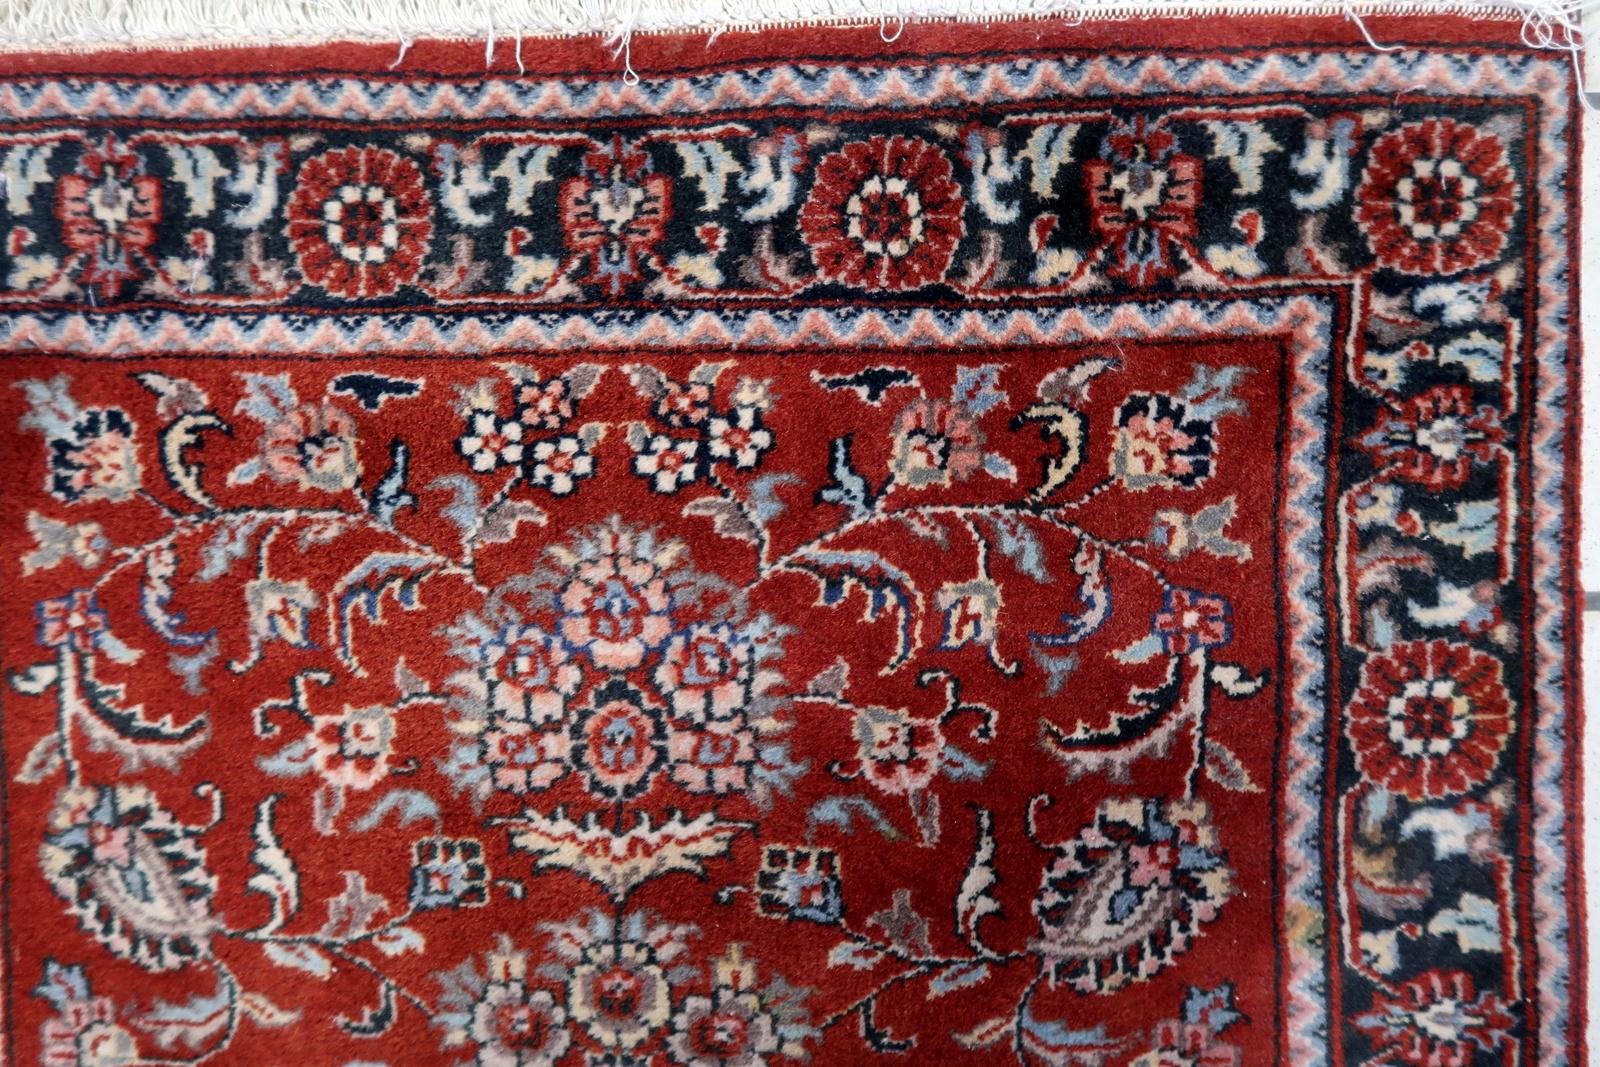 Handmade Vintage Persian Style Sarouk Rug from the 1970s. This exquisite piece, measuring 2.4 feet by 4 feet, carries a sense of reverence and tradition.

Product Description:
Design & Patterns:
The central area of the rug features an elegant